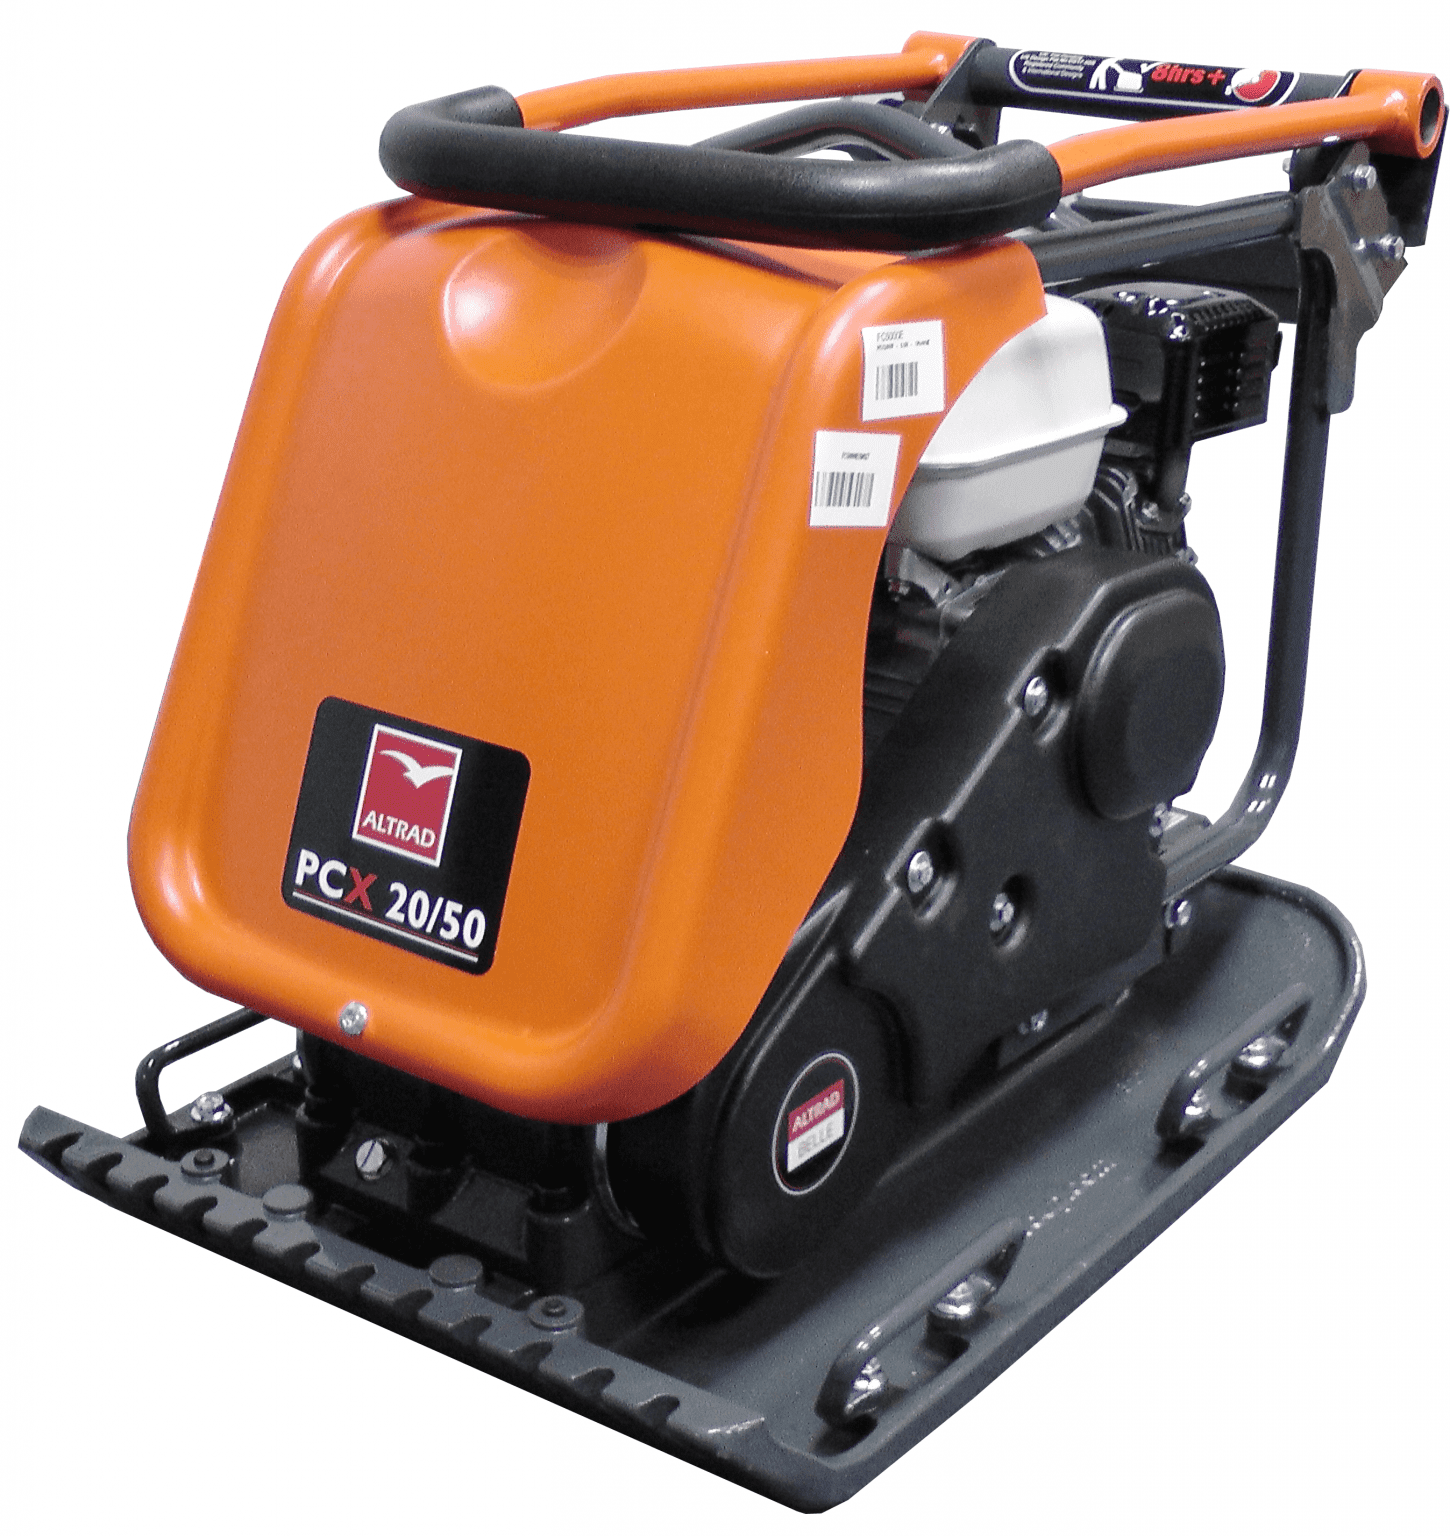 Vibrating plate compactor hire